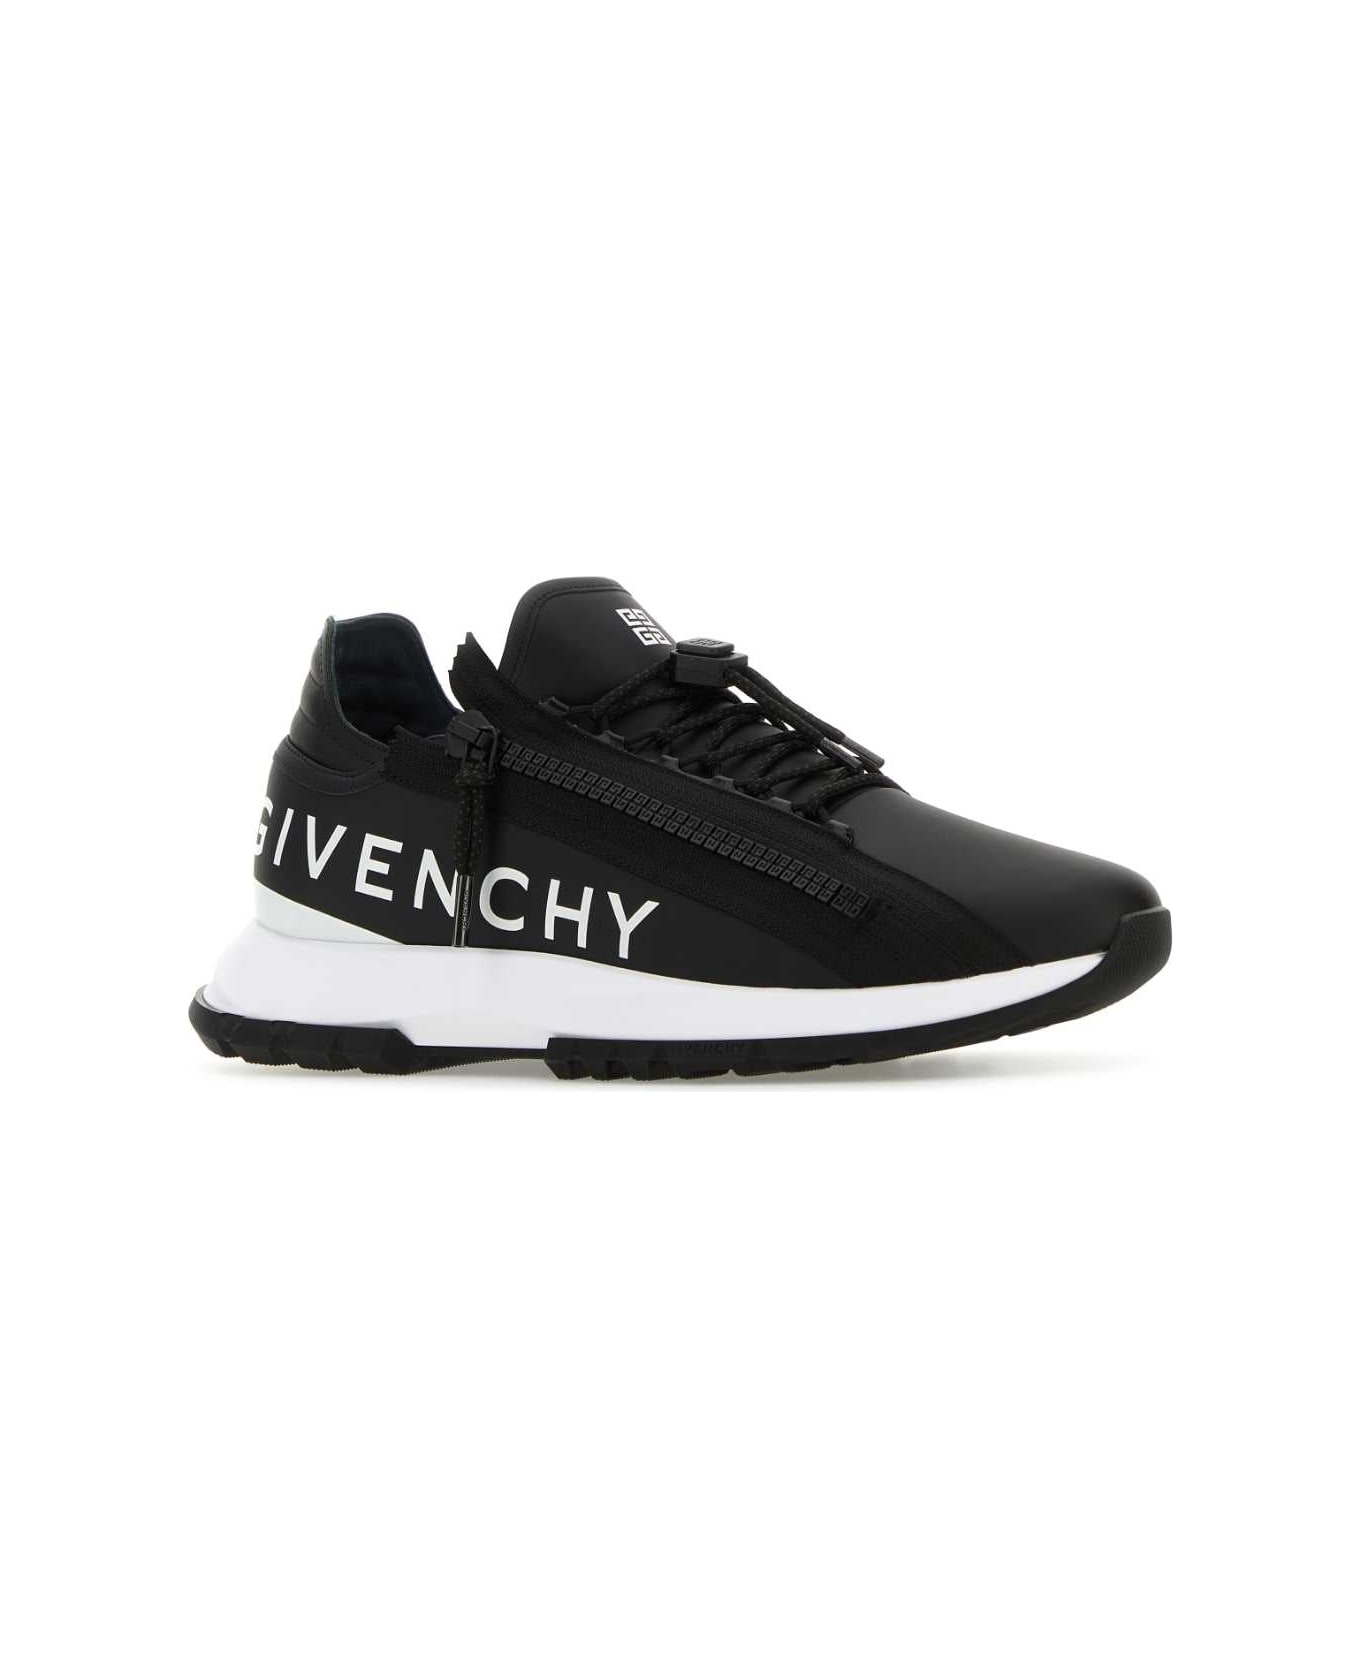 Givenchy Black Leather Spectre Sneakers - BLACKWHITE